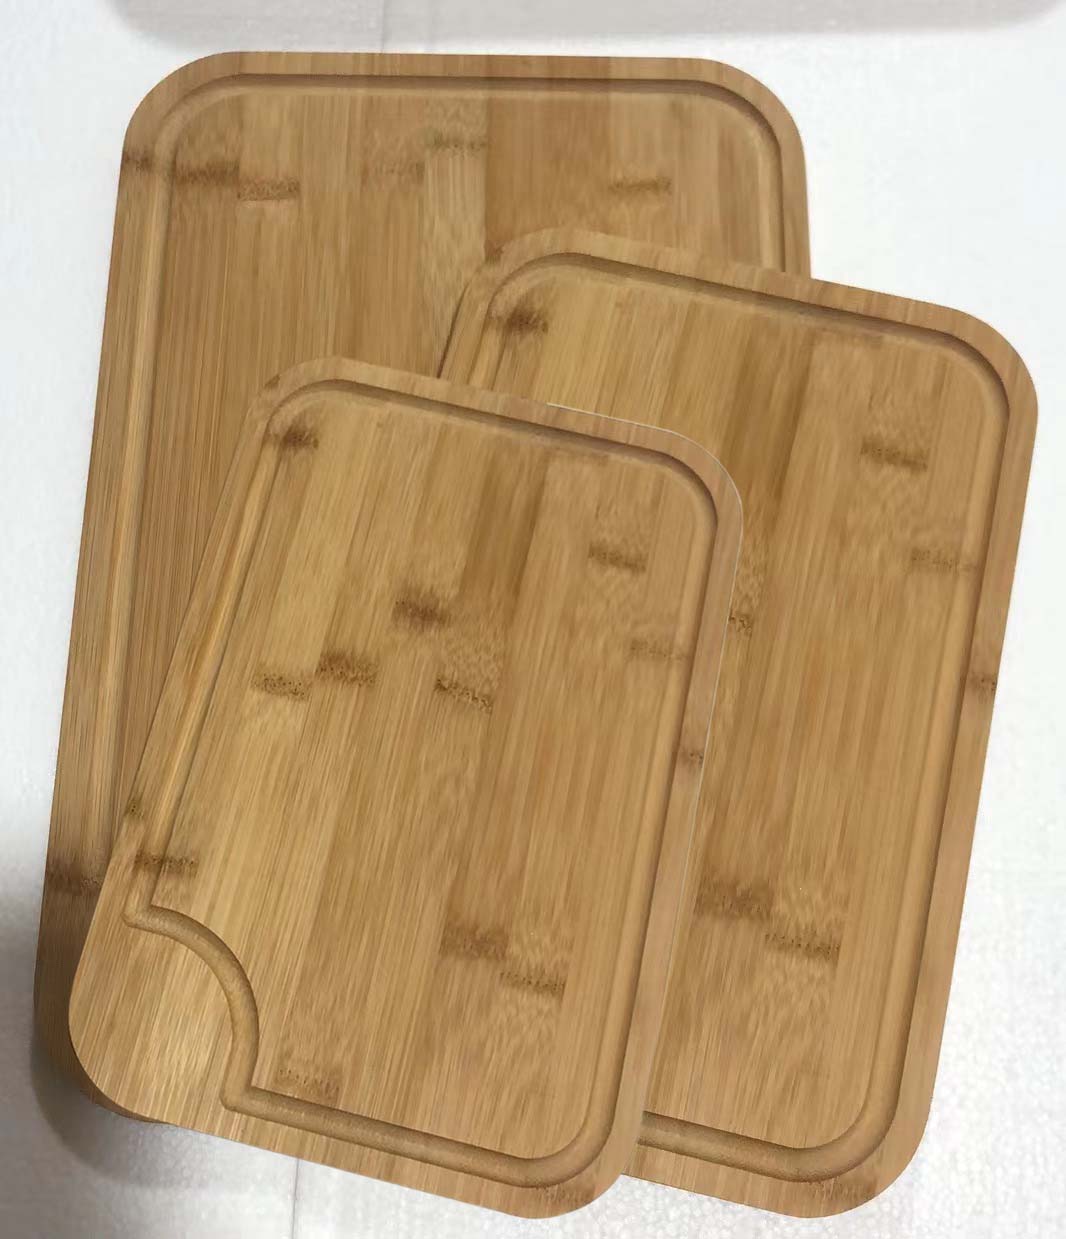 Findling the Ideal Cutting Boards for Kitchen Room